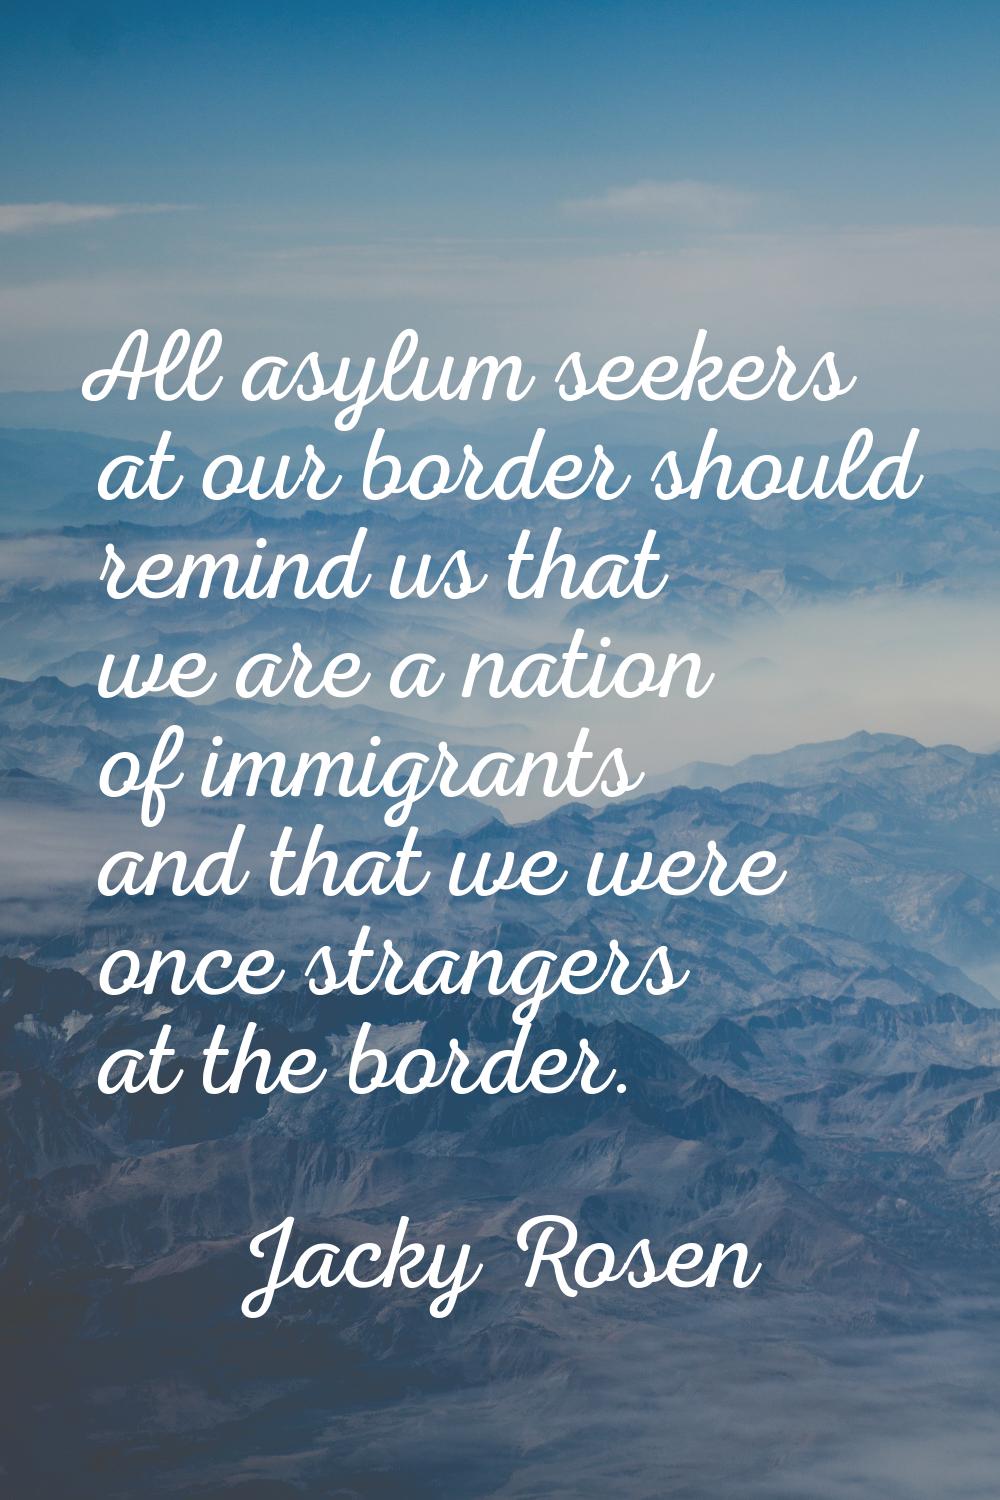 All asylum seekers at our border should remind us that we are a nation of immigrants and that we we